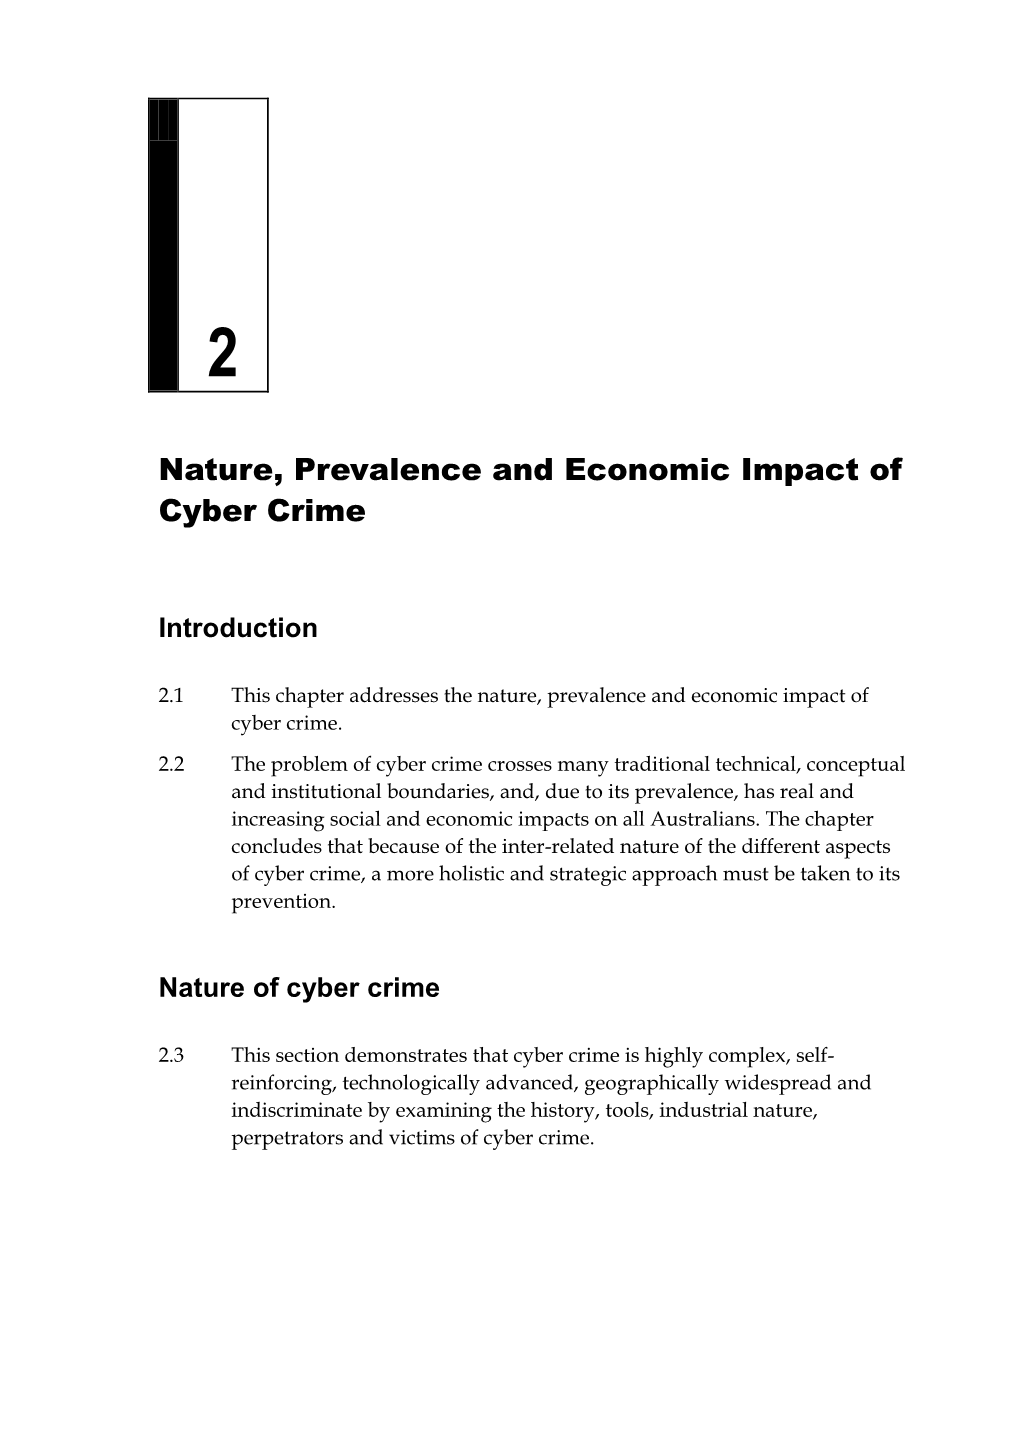 Chapter 2: Nature, Prevalence and Economic Impact of Cyber Crime